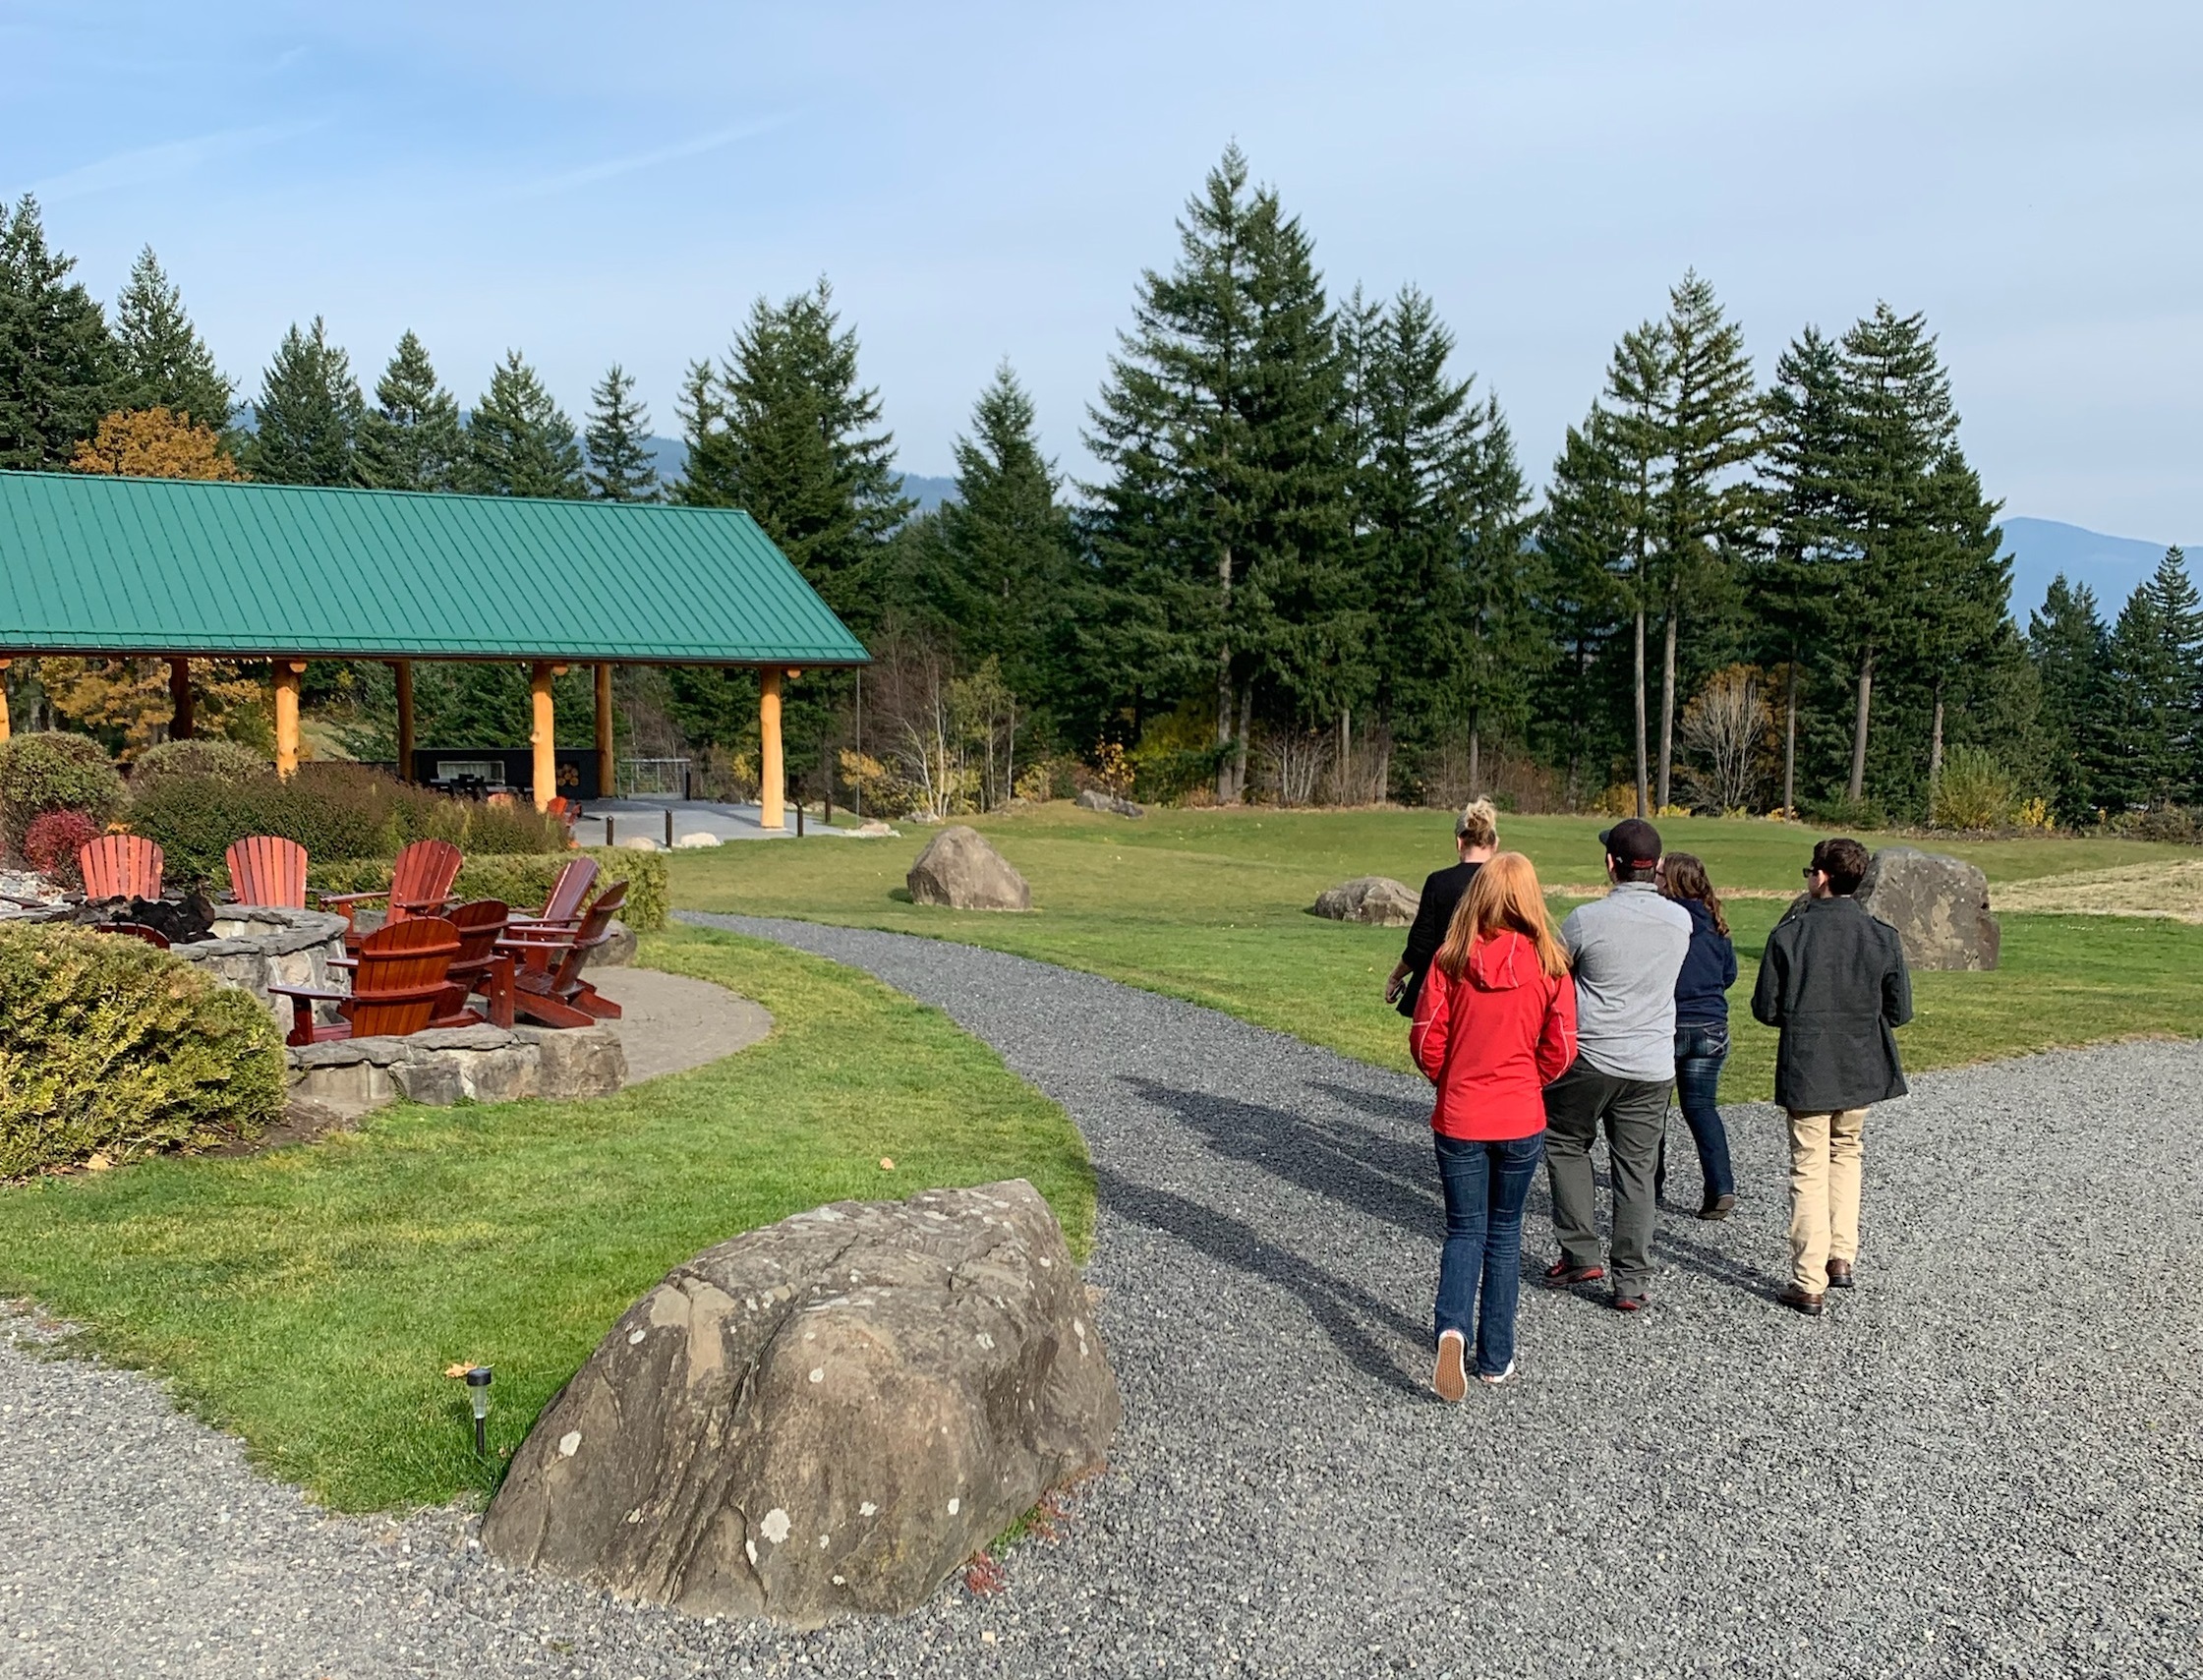 Group of students touring the campus of the Skamania Lodge with trees and event gazebo in the background